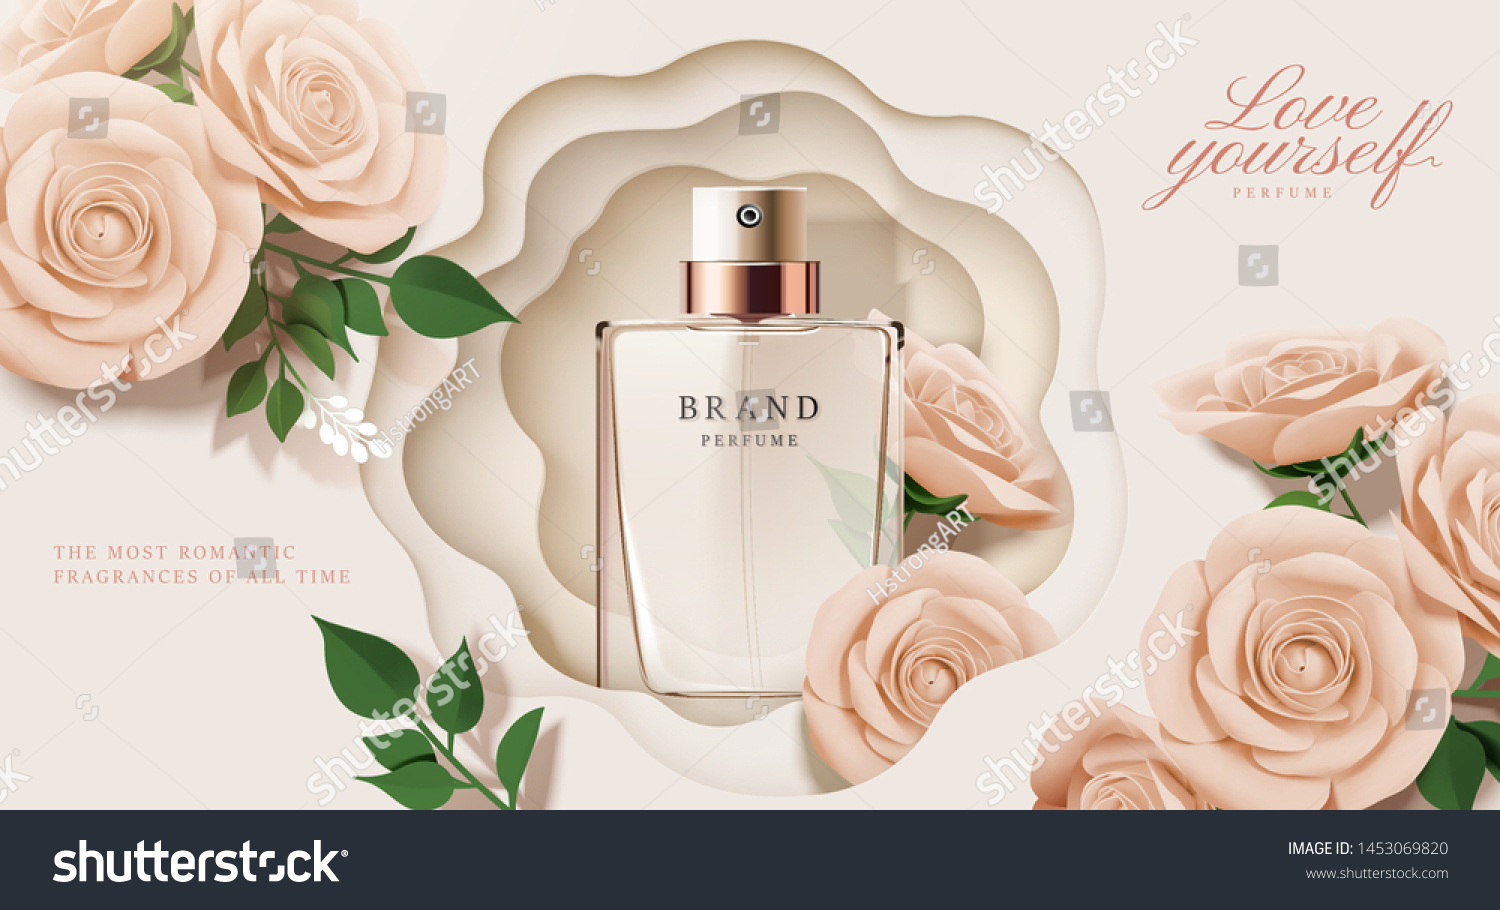 stock-vector-elegant-perfume-ads-with-paper-beige-roses-decorations-in-d-illustration-1453069820